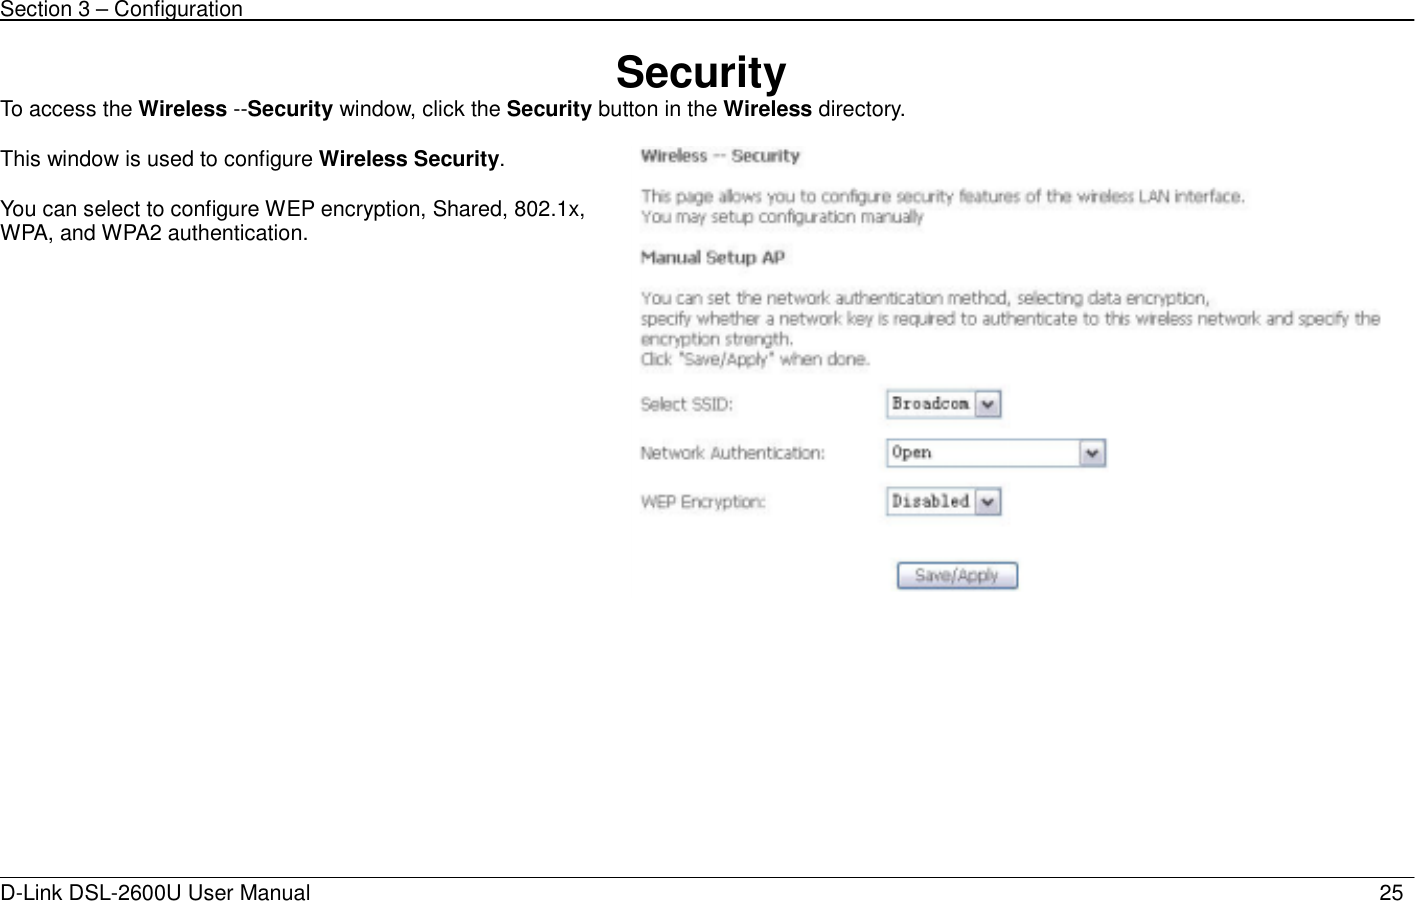 Section 3 – Configuration   D-Link DSL-2600U User Manual                            25Security To access the Wireless --Security window, click the Security button in the Wireless directory.  This window is used to configure Wireless Security.  You can select to configure WEP encryption, Shared, 802.1x, WPA, and WPA2 authentication.       